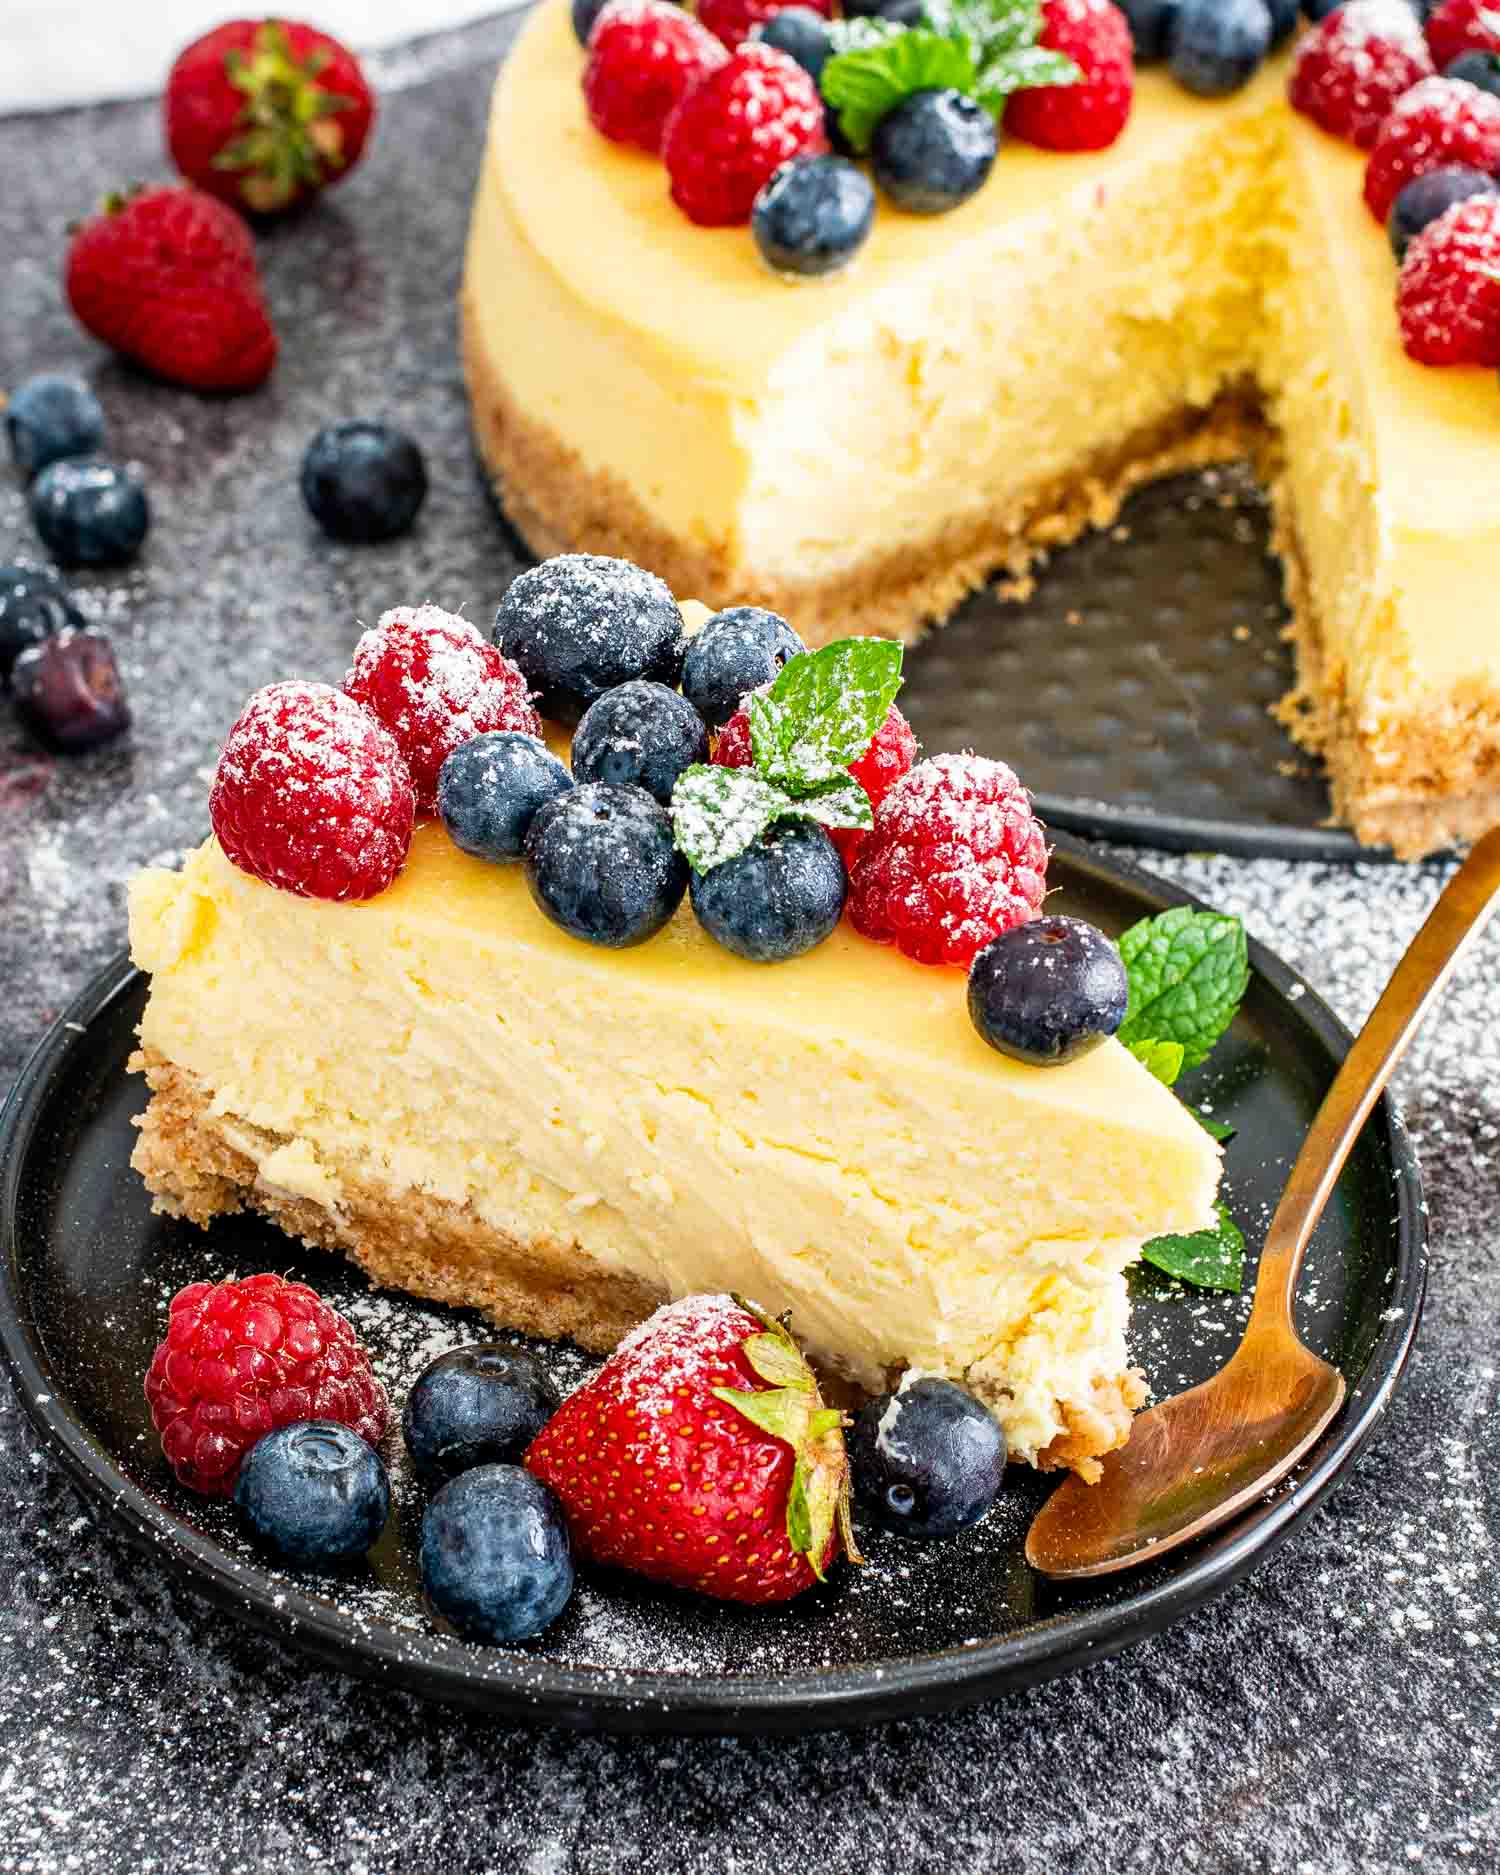 a slice of new york style cheesecake topped with berries on a black plate.